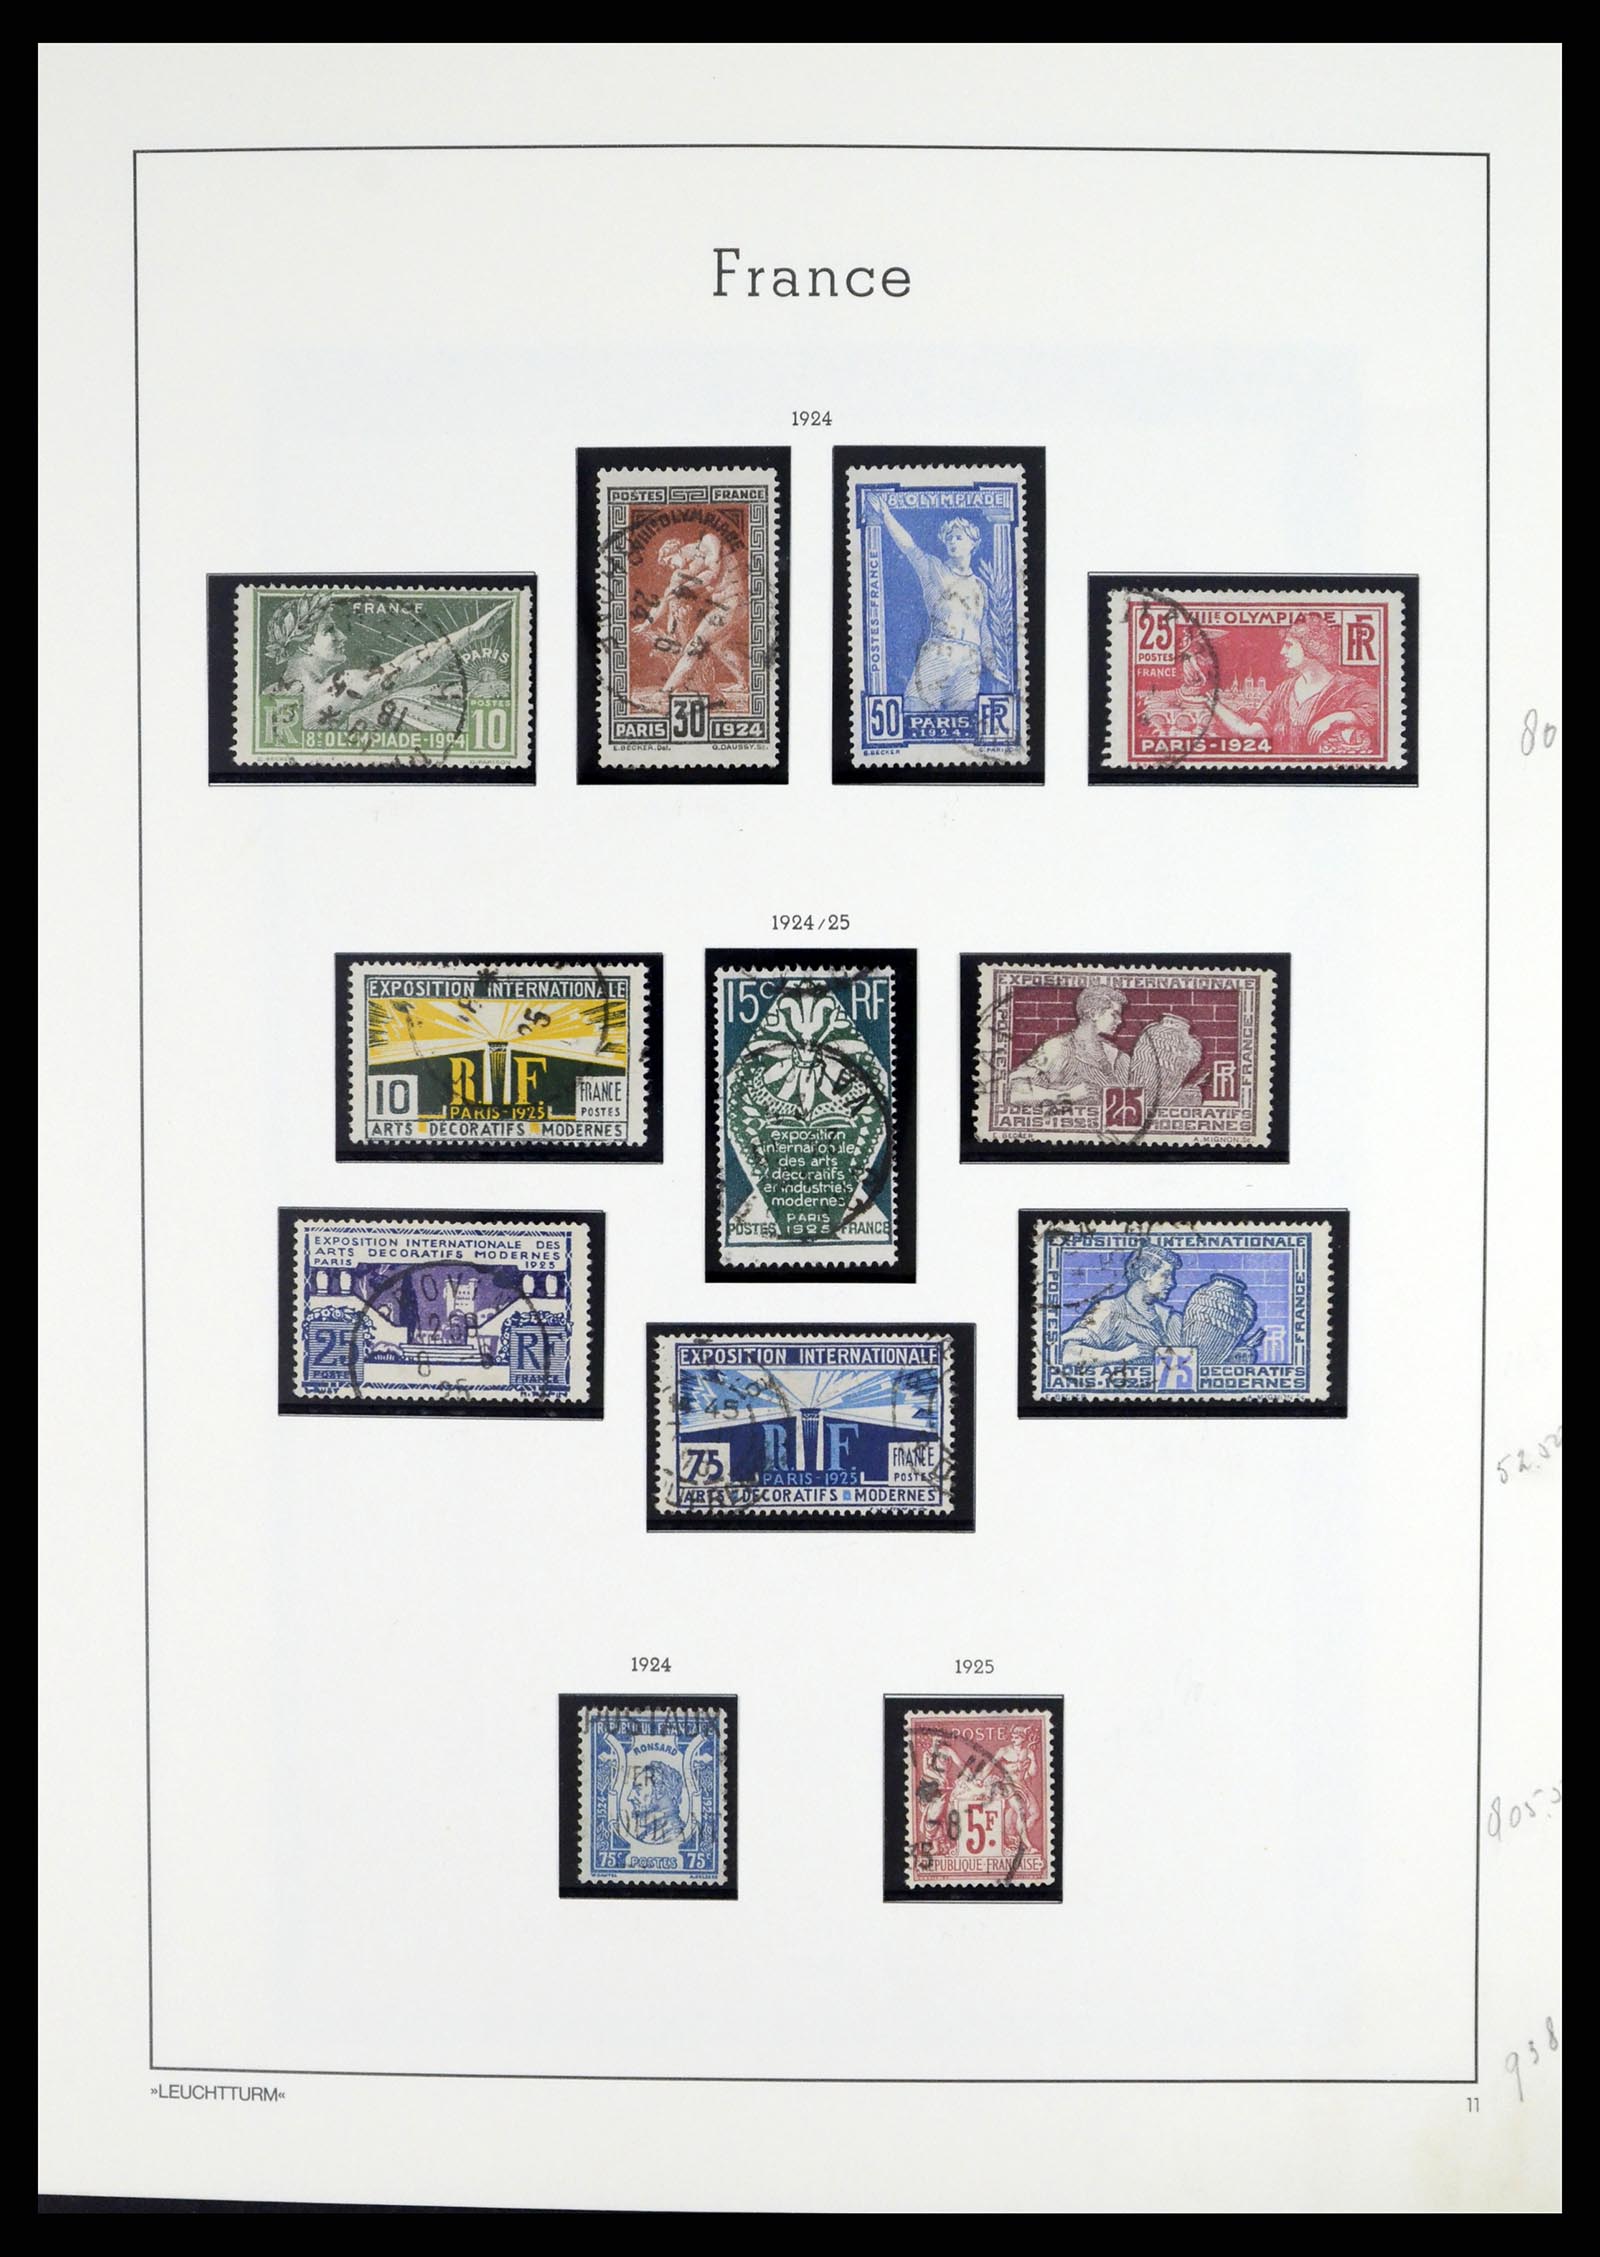 37415 015 - Stamp collection 37415 France 1849-2005.